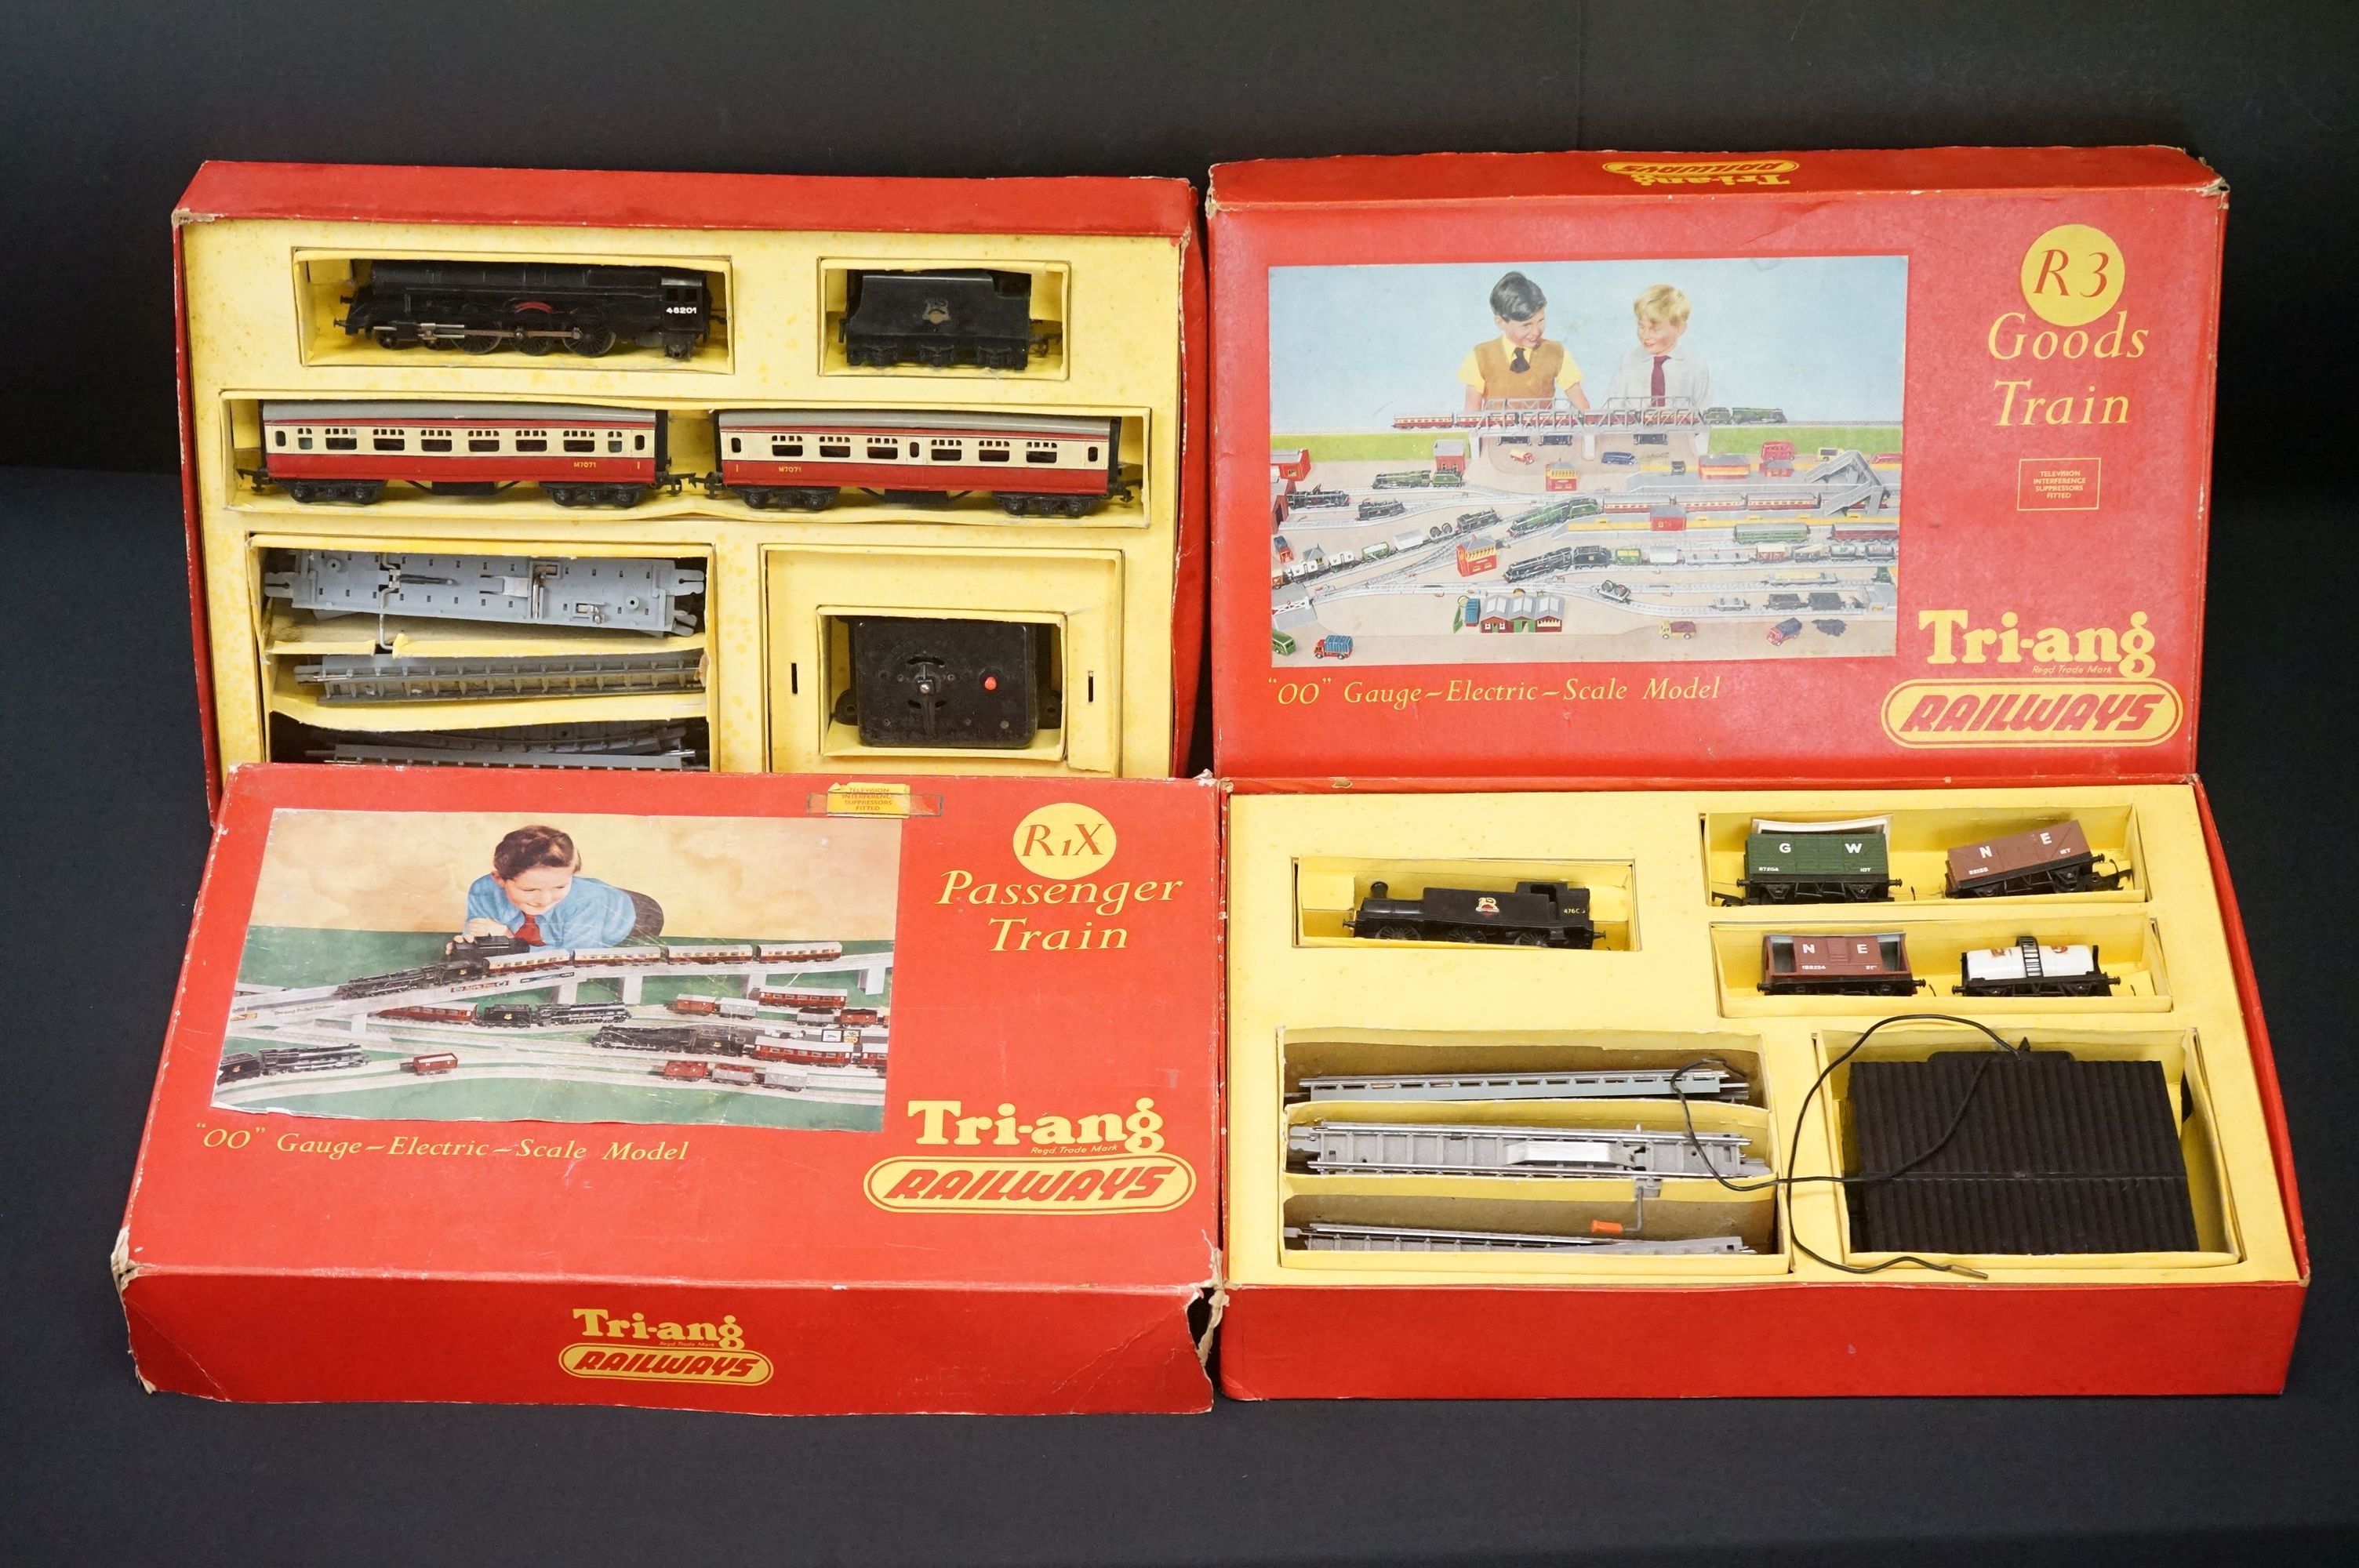 Two boxed Triang OO gauge train sets to include R3 Goods Train & R1X Passenger Train, both appear to